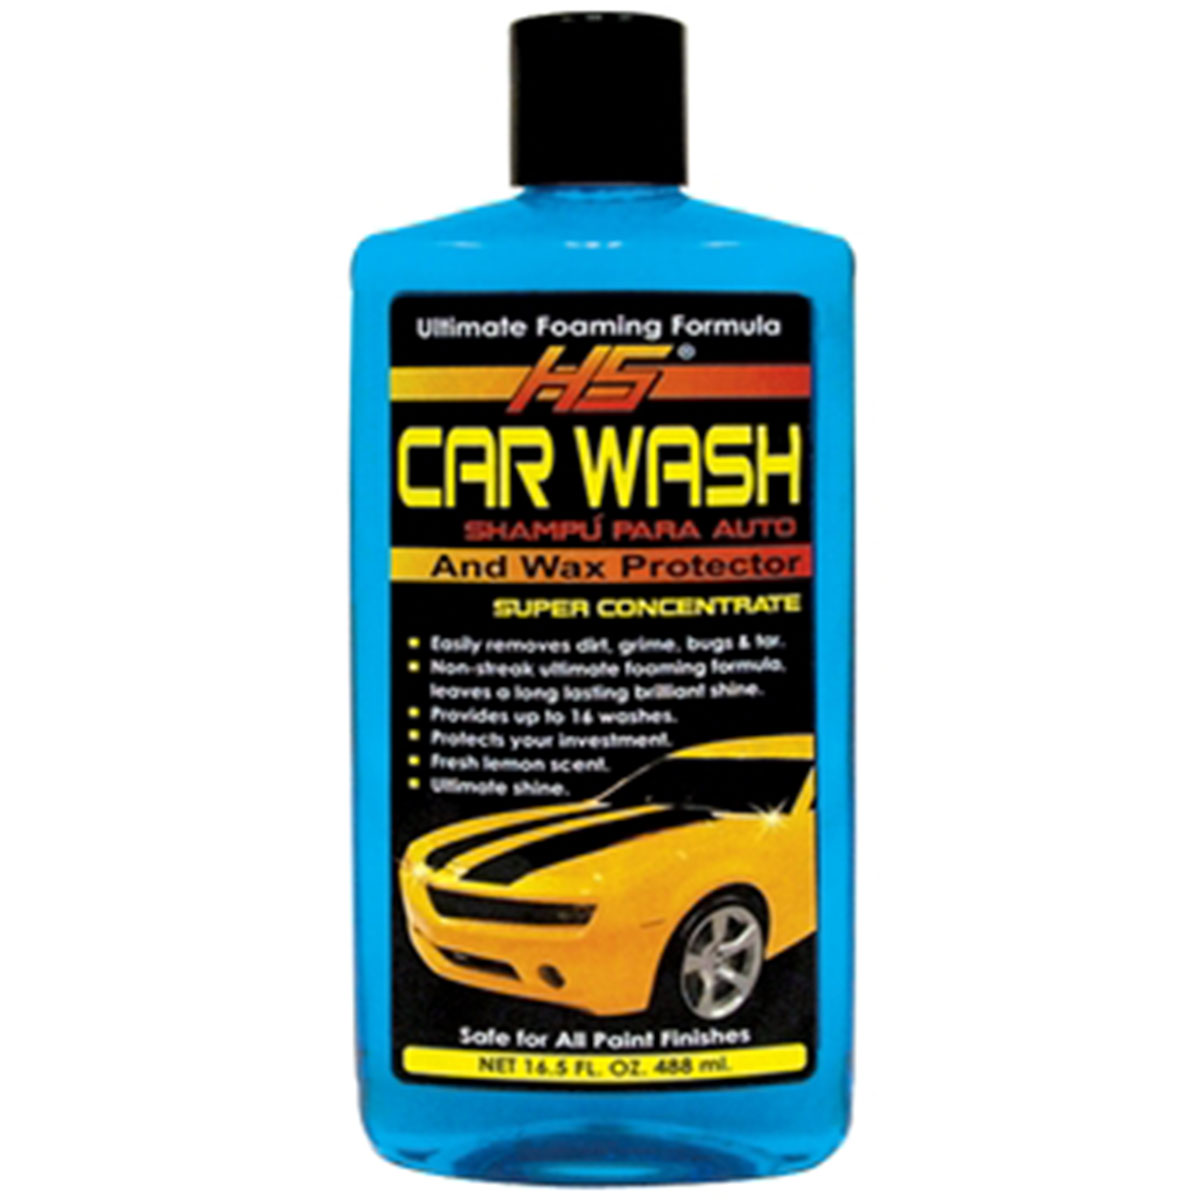  Hs Car Wash and Wax Protector Concentrate